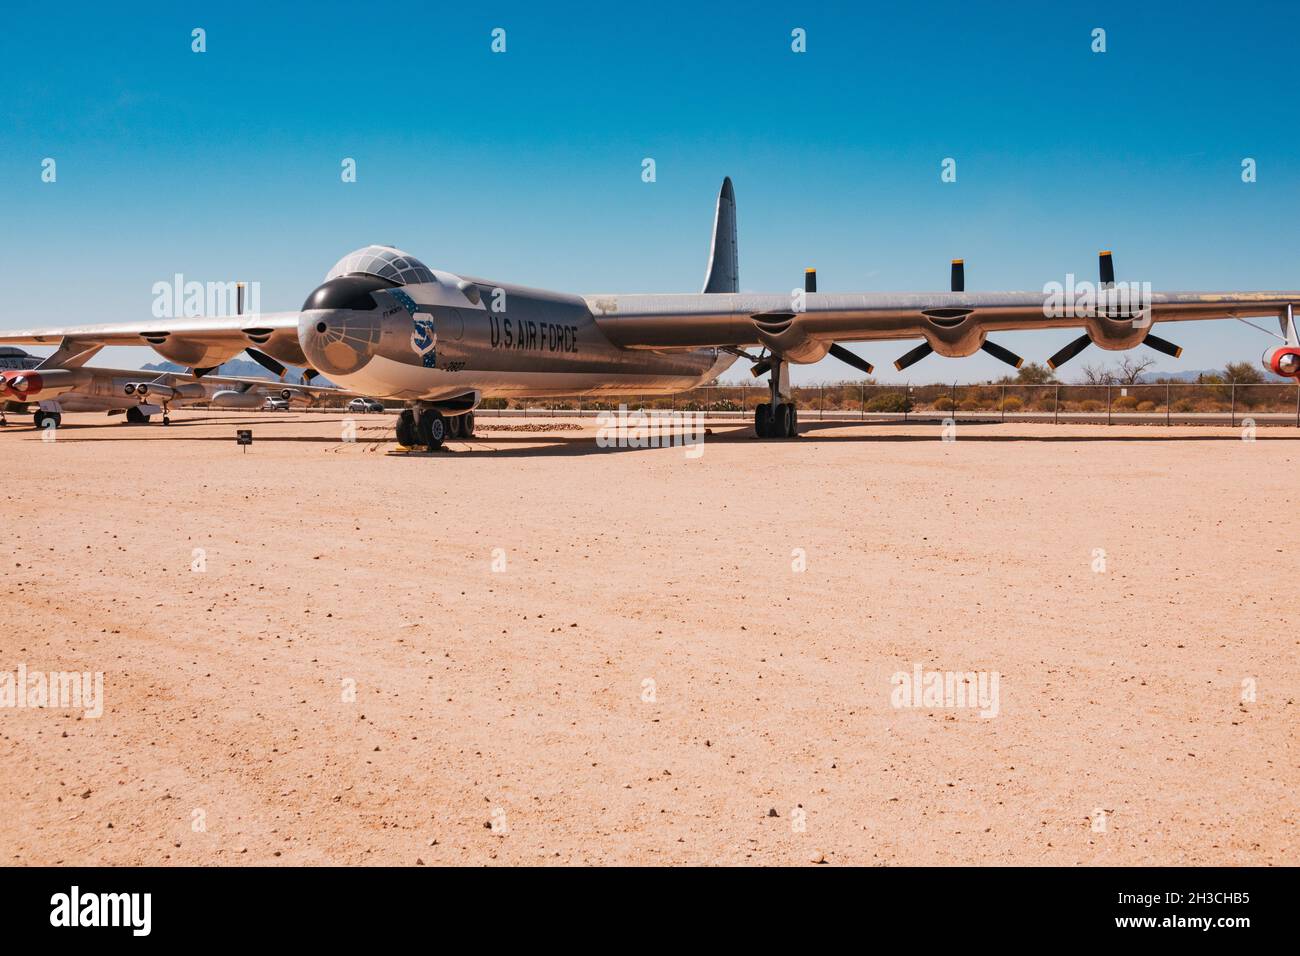 a retired Convair B-36 Peacemaker at the Pima Air & Space Museum, Arizona, USA. It is the largest mass-produced piston aircraft ever built Stock Photo